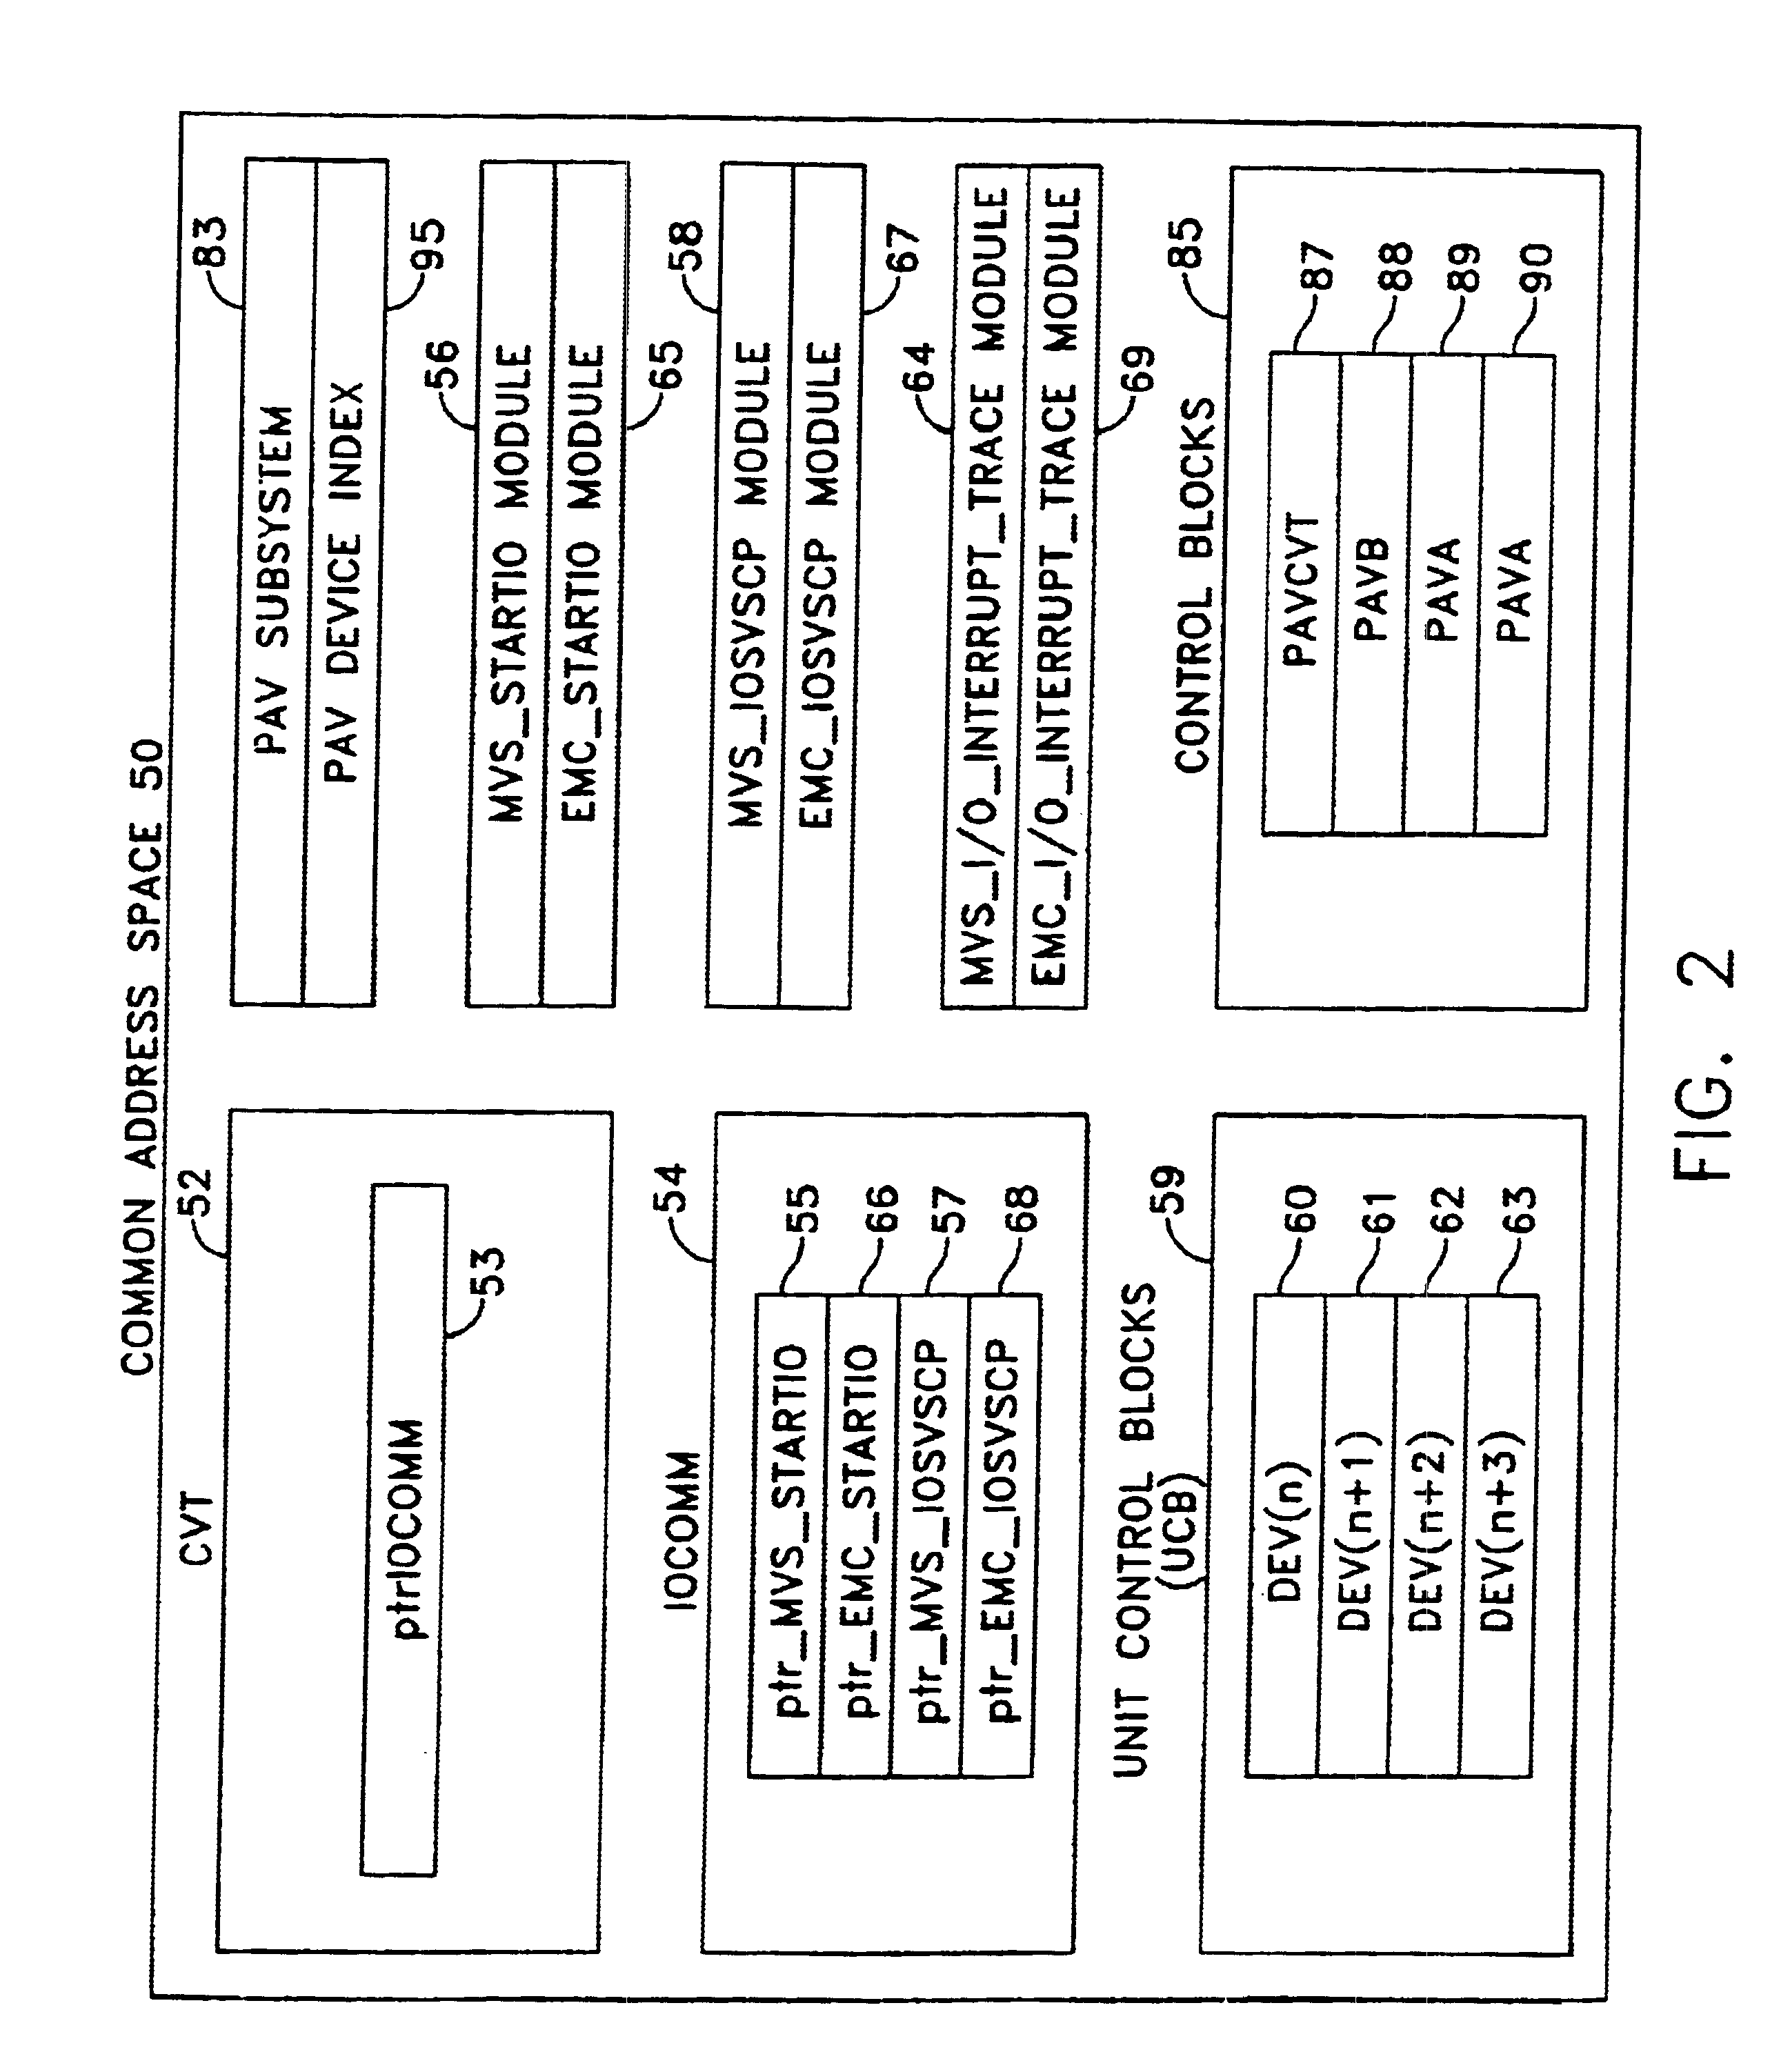 Operating system for generating overlapped input-output requests to a device in a disk array storage